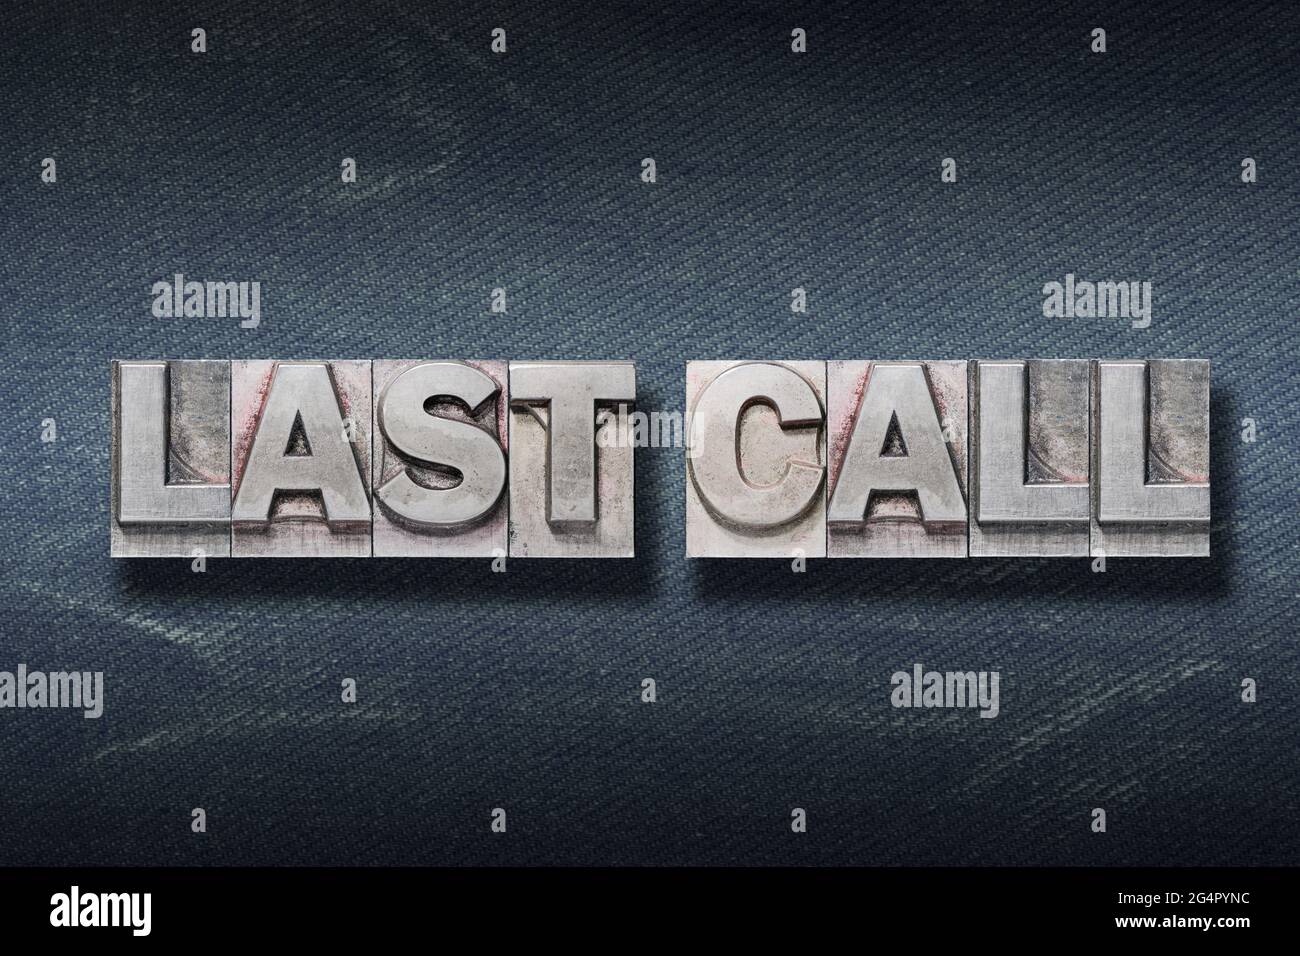 last call phrase made from metallic letterpress on dark jeans background Stock Photo